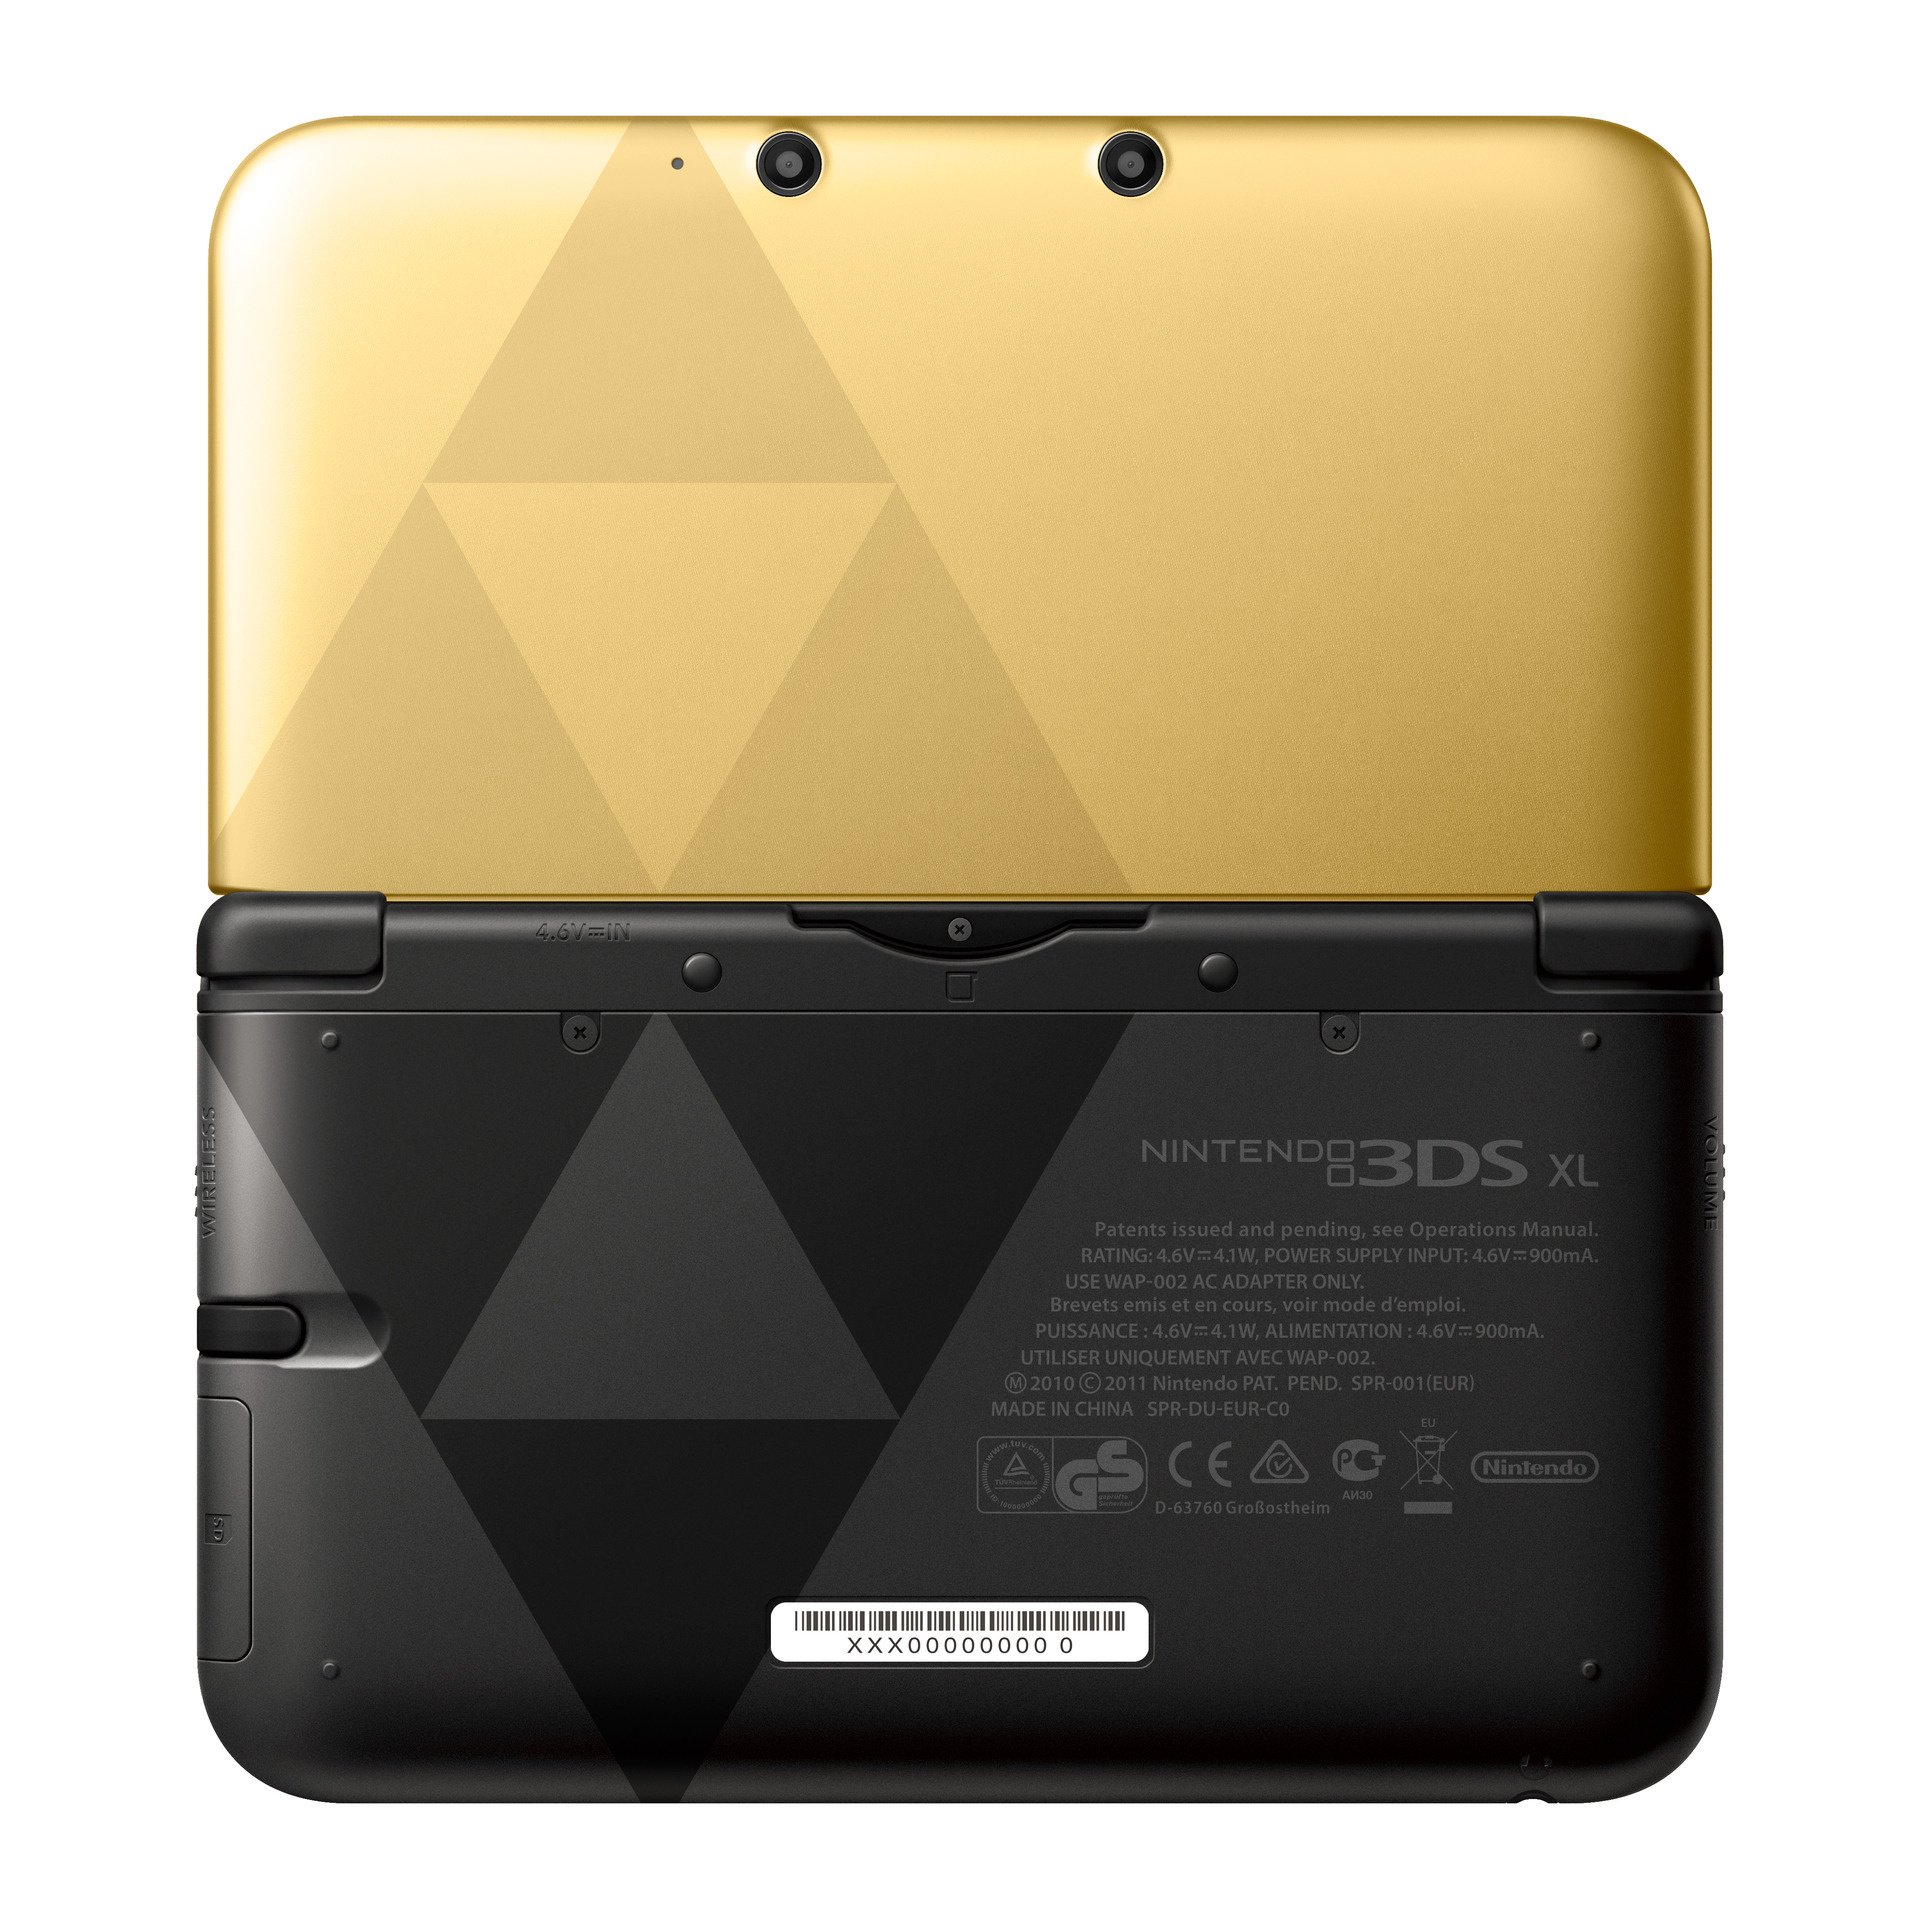 3ds xl link between worlds edition